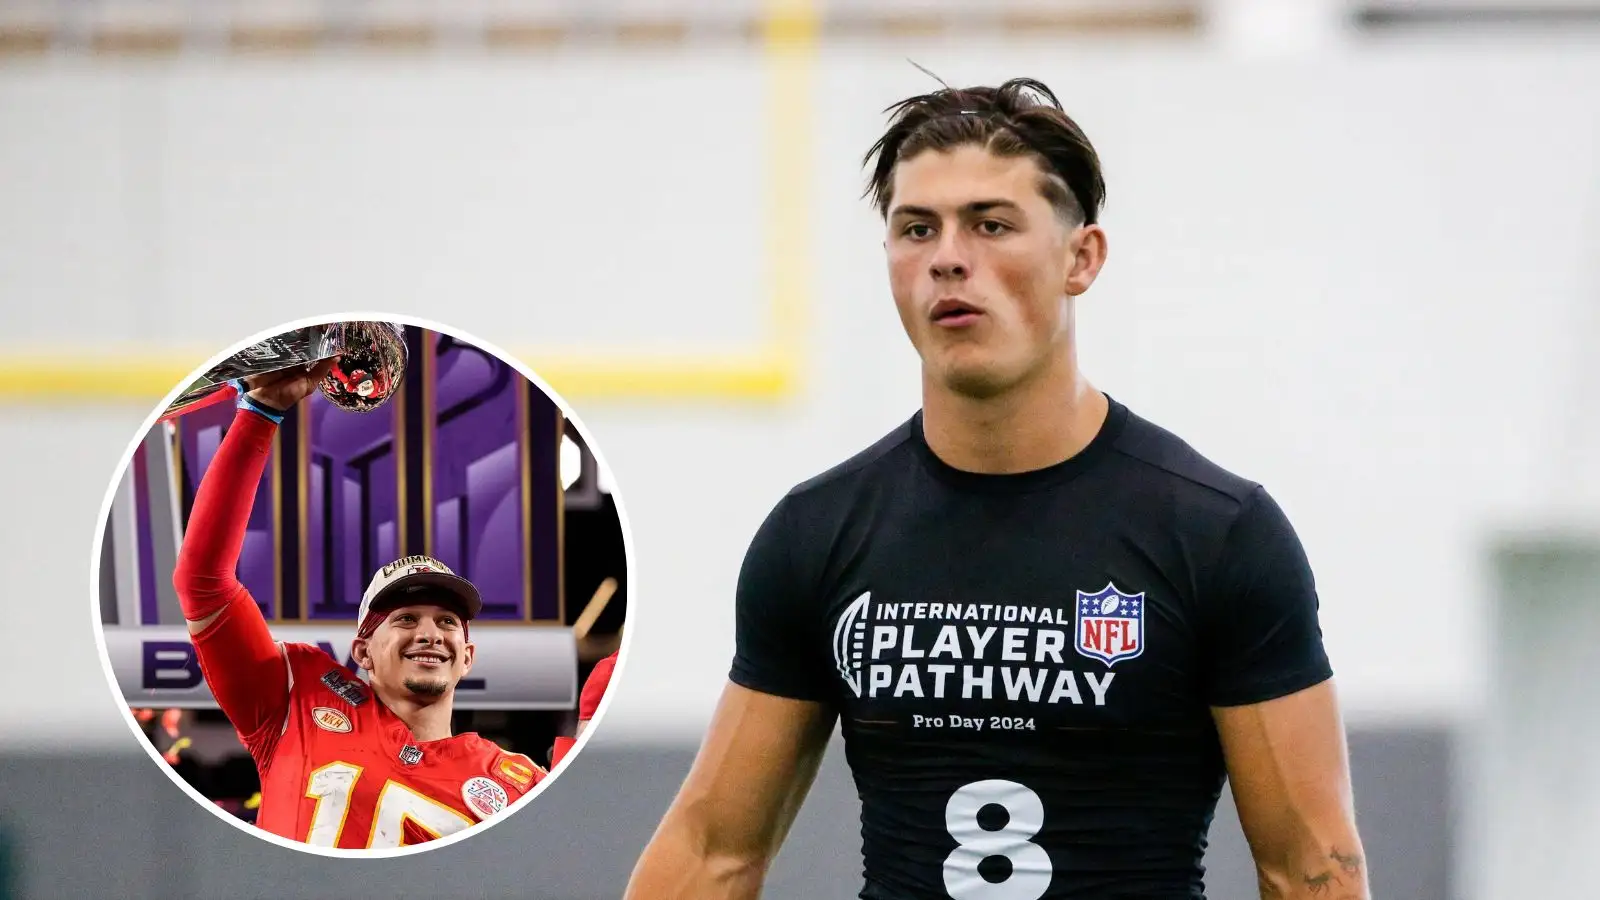 Louis Rees-Zammit reveals ‘mad’ start in NFL after Patrick Mahomes text ...